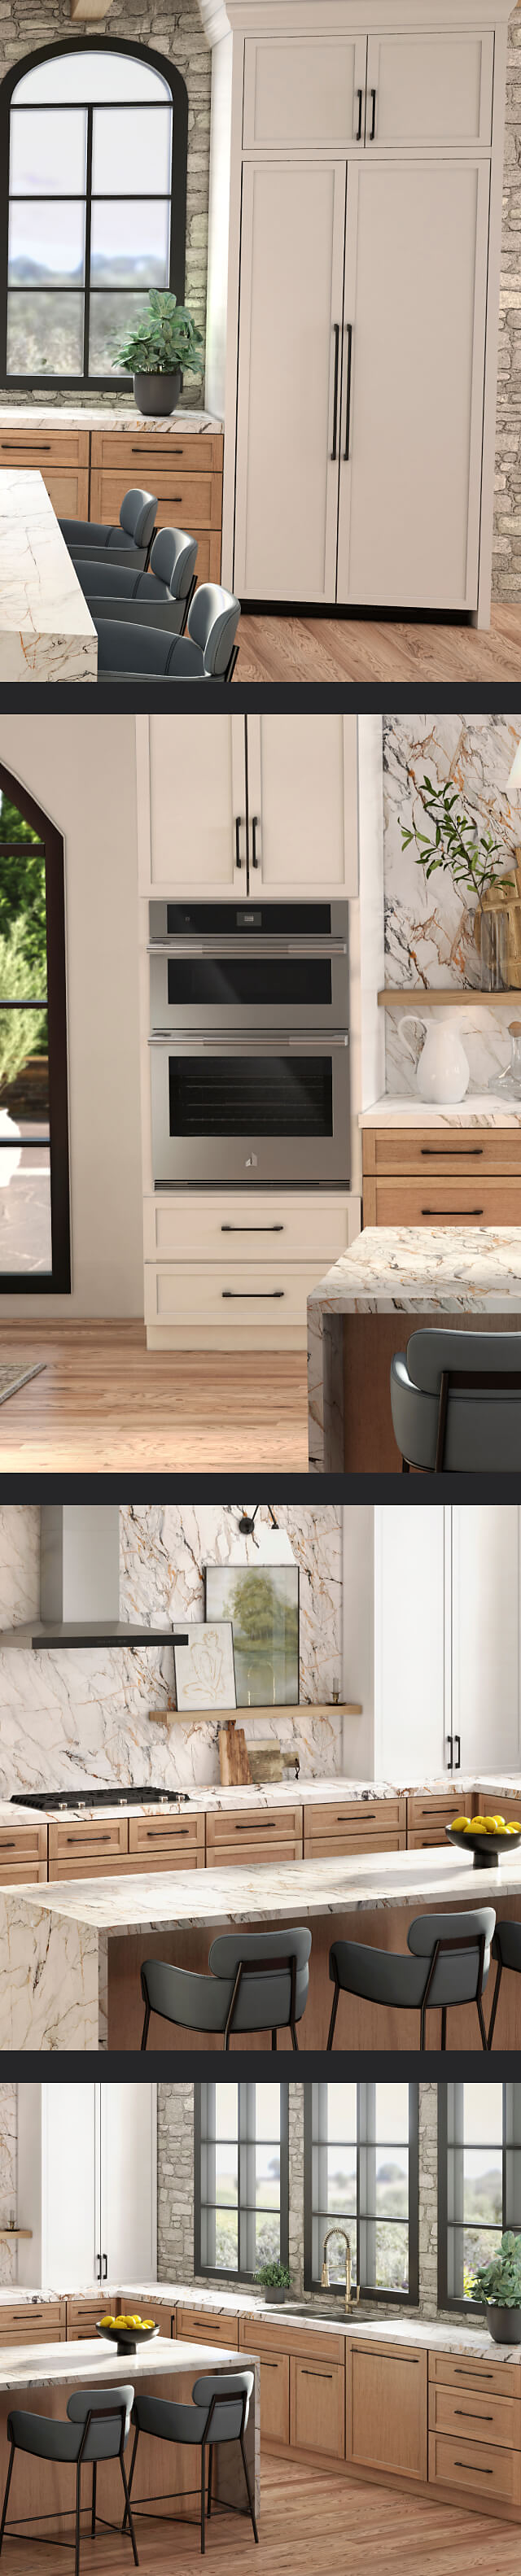 A collage of images including a JennAir® side-by-side built-in refrigerator fitted with white custom panels to match cabinetry; a 30-inch microwave combination wall oven installed in a white kitchen; A cooktop and vent hood installed in a white kitchen; a panel-ready dishwasher installed with a custom panel to match the wooden cabinetry.